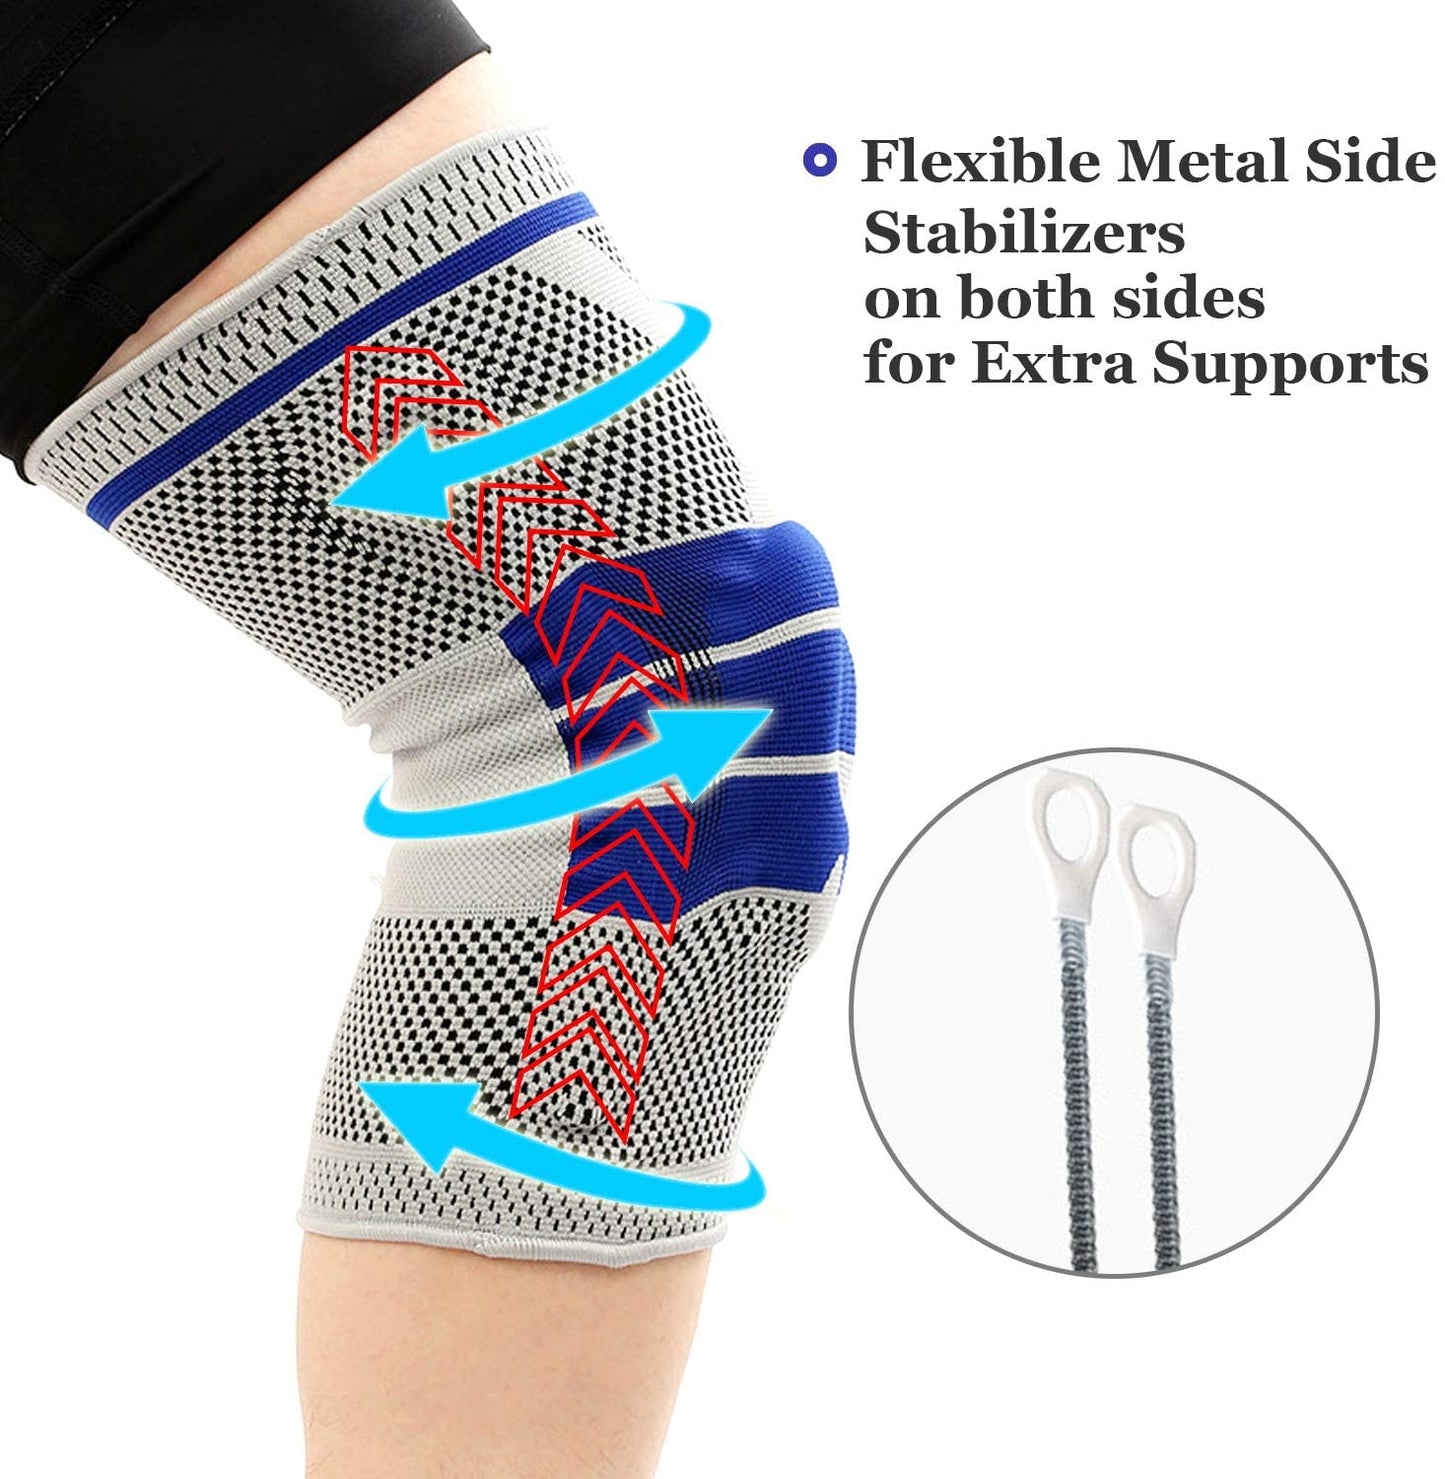 Knee Compression Sleeve for Men and Women, Knee Support Brace for